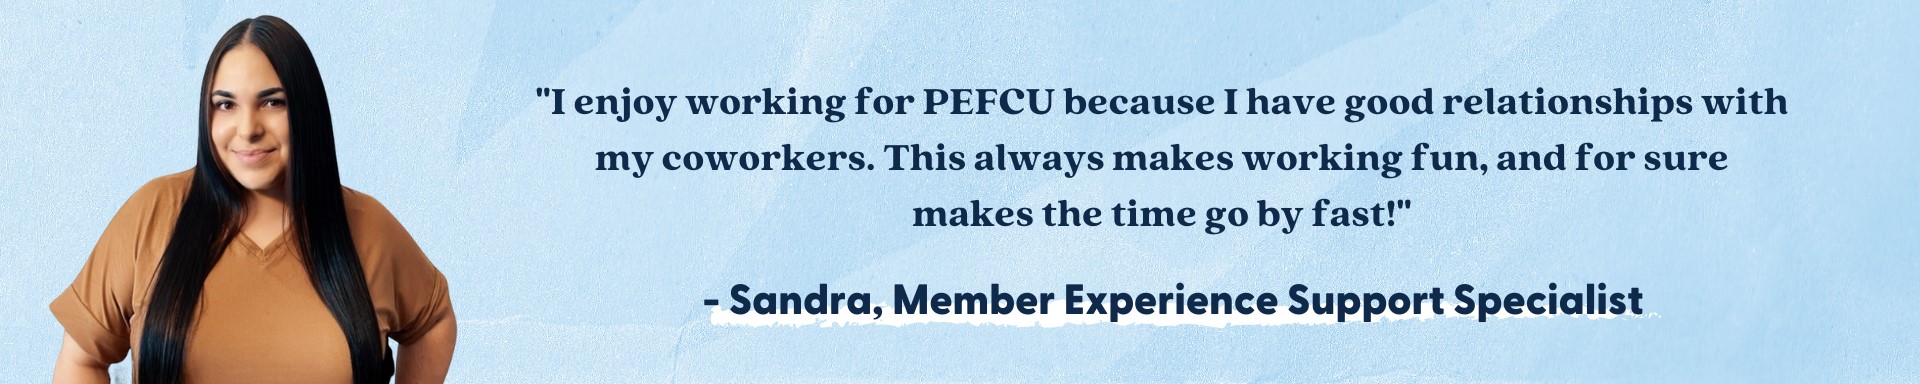 I enjoy working for PEFCU because I have good relationships with my coworkers.